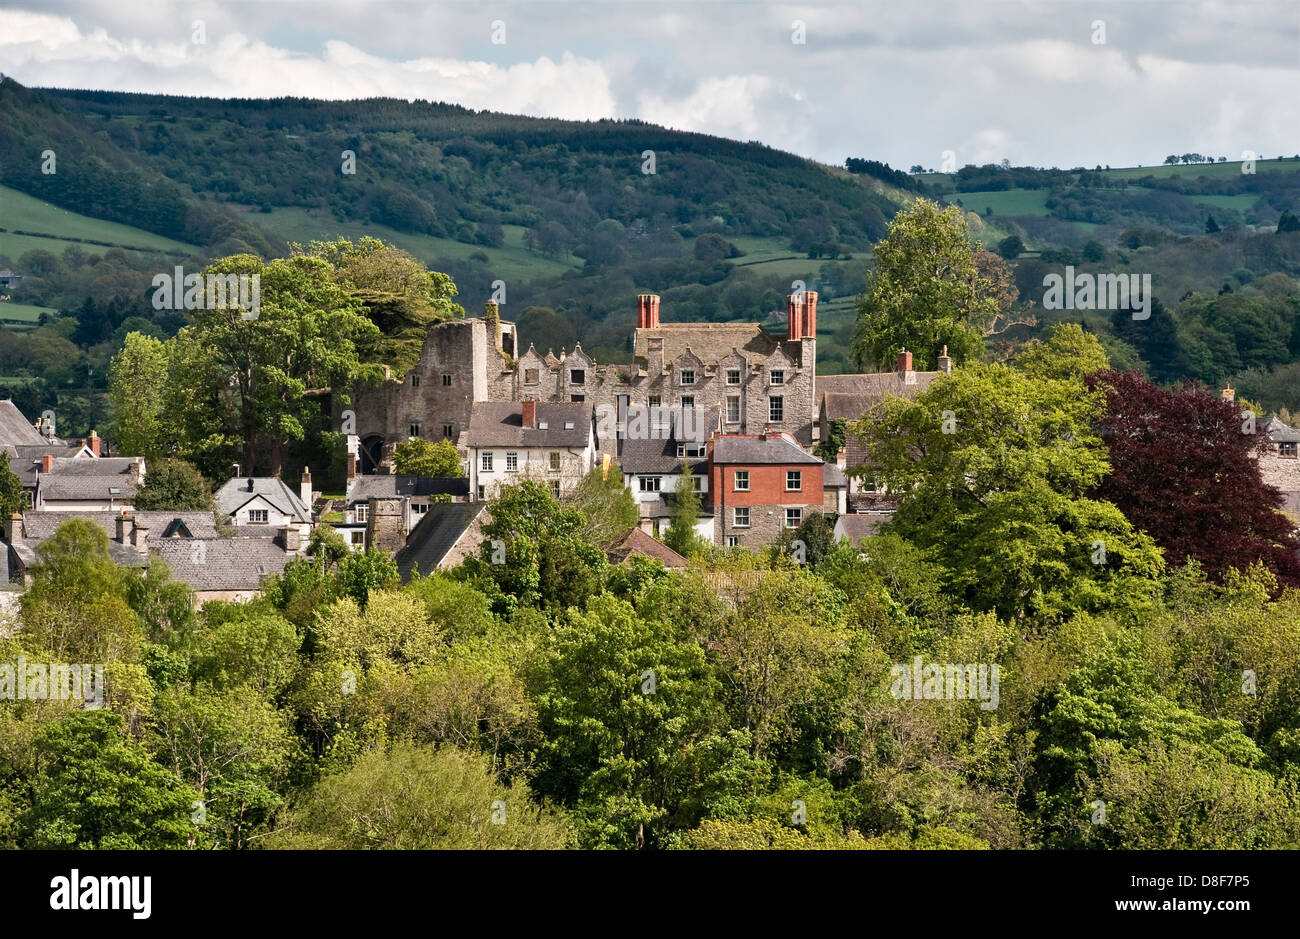 The 'book' town of Hay-on-Wye (on the Herefordshire - Wales border) is dominated both by its Jacobean castle and the wild Black Mountains beyond (UK) Stock Photo